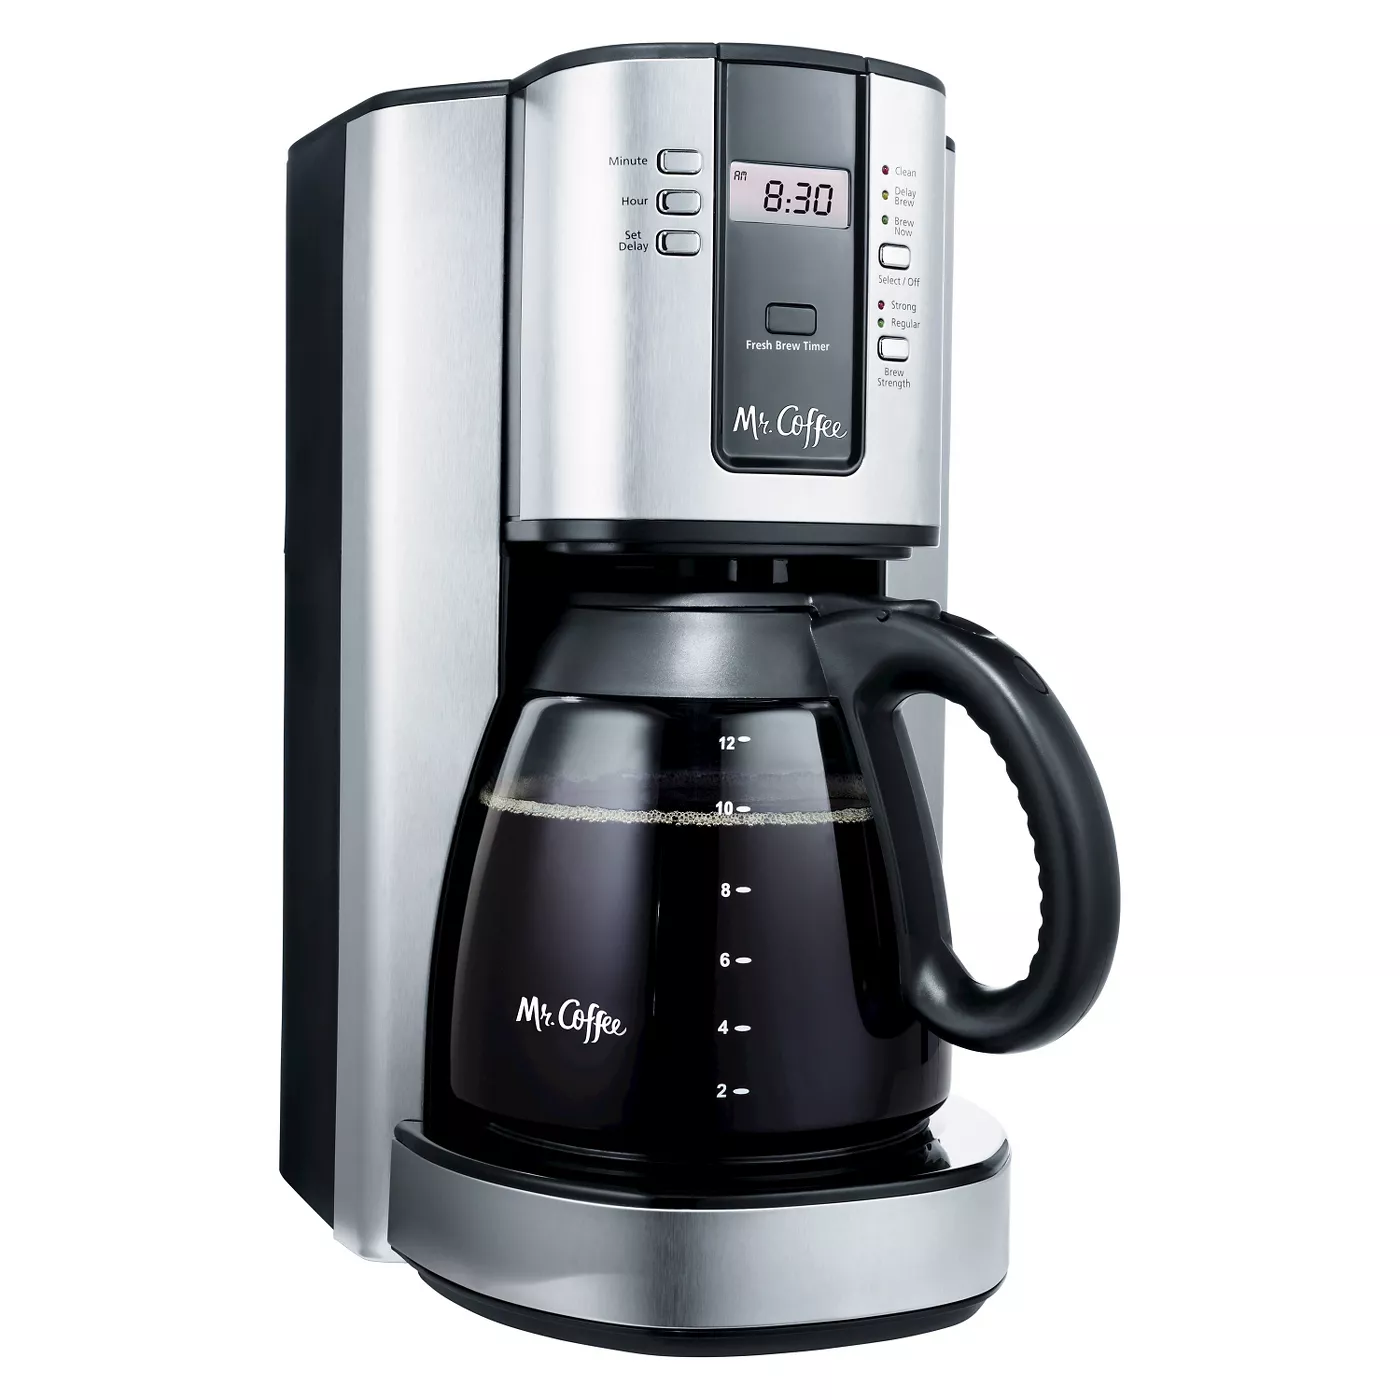 Mr. Coffee 12 Cup Programmable Coffee Maker - Stainless Steel BVMC-TJX37 - image 1 of 5